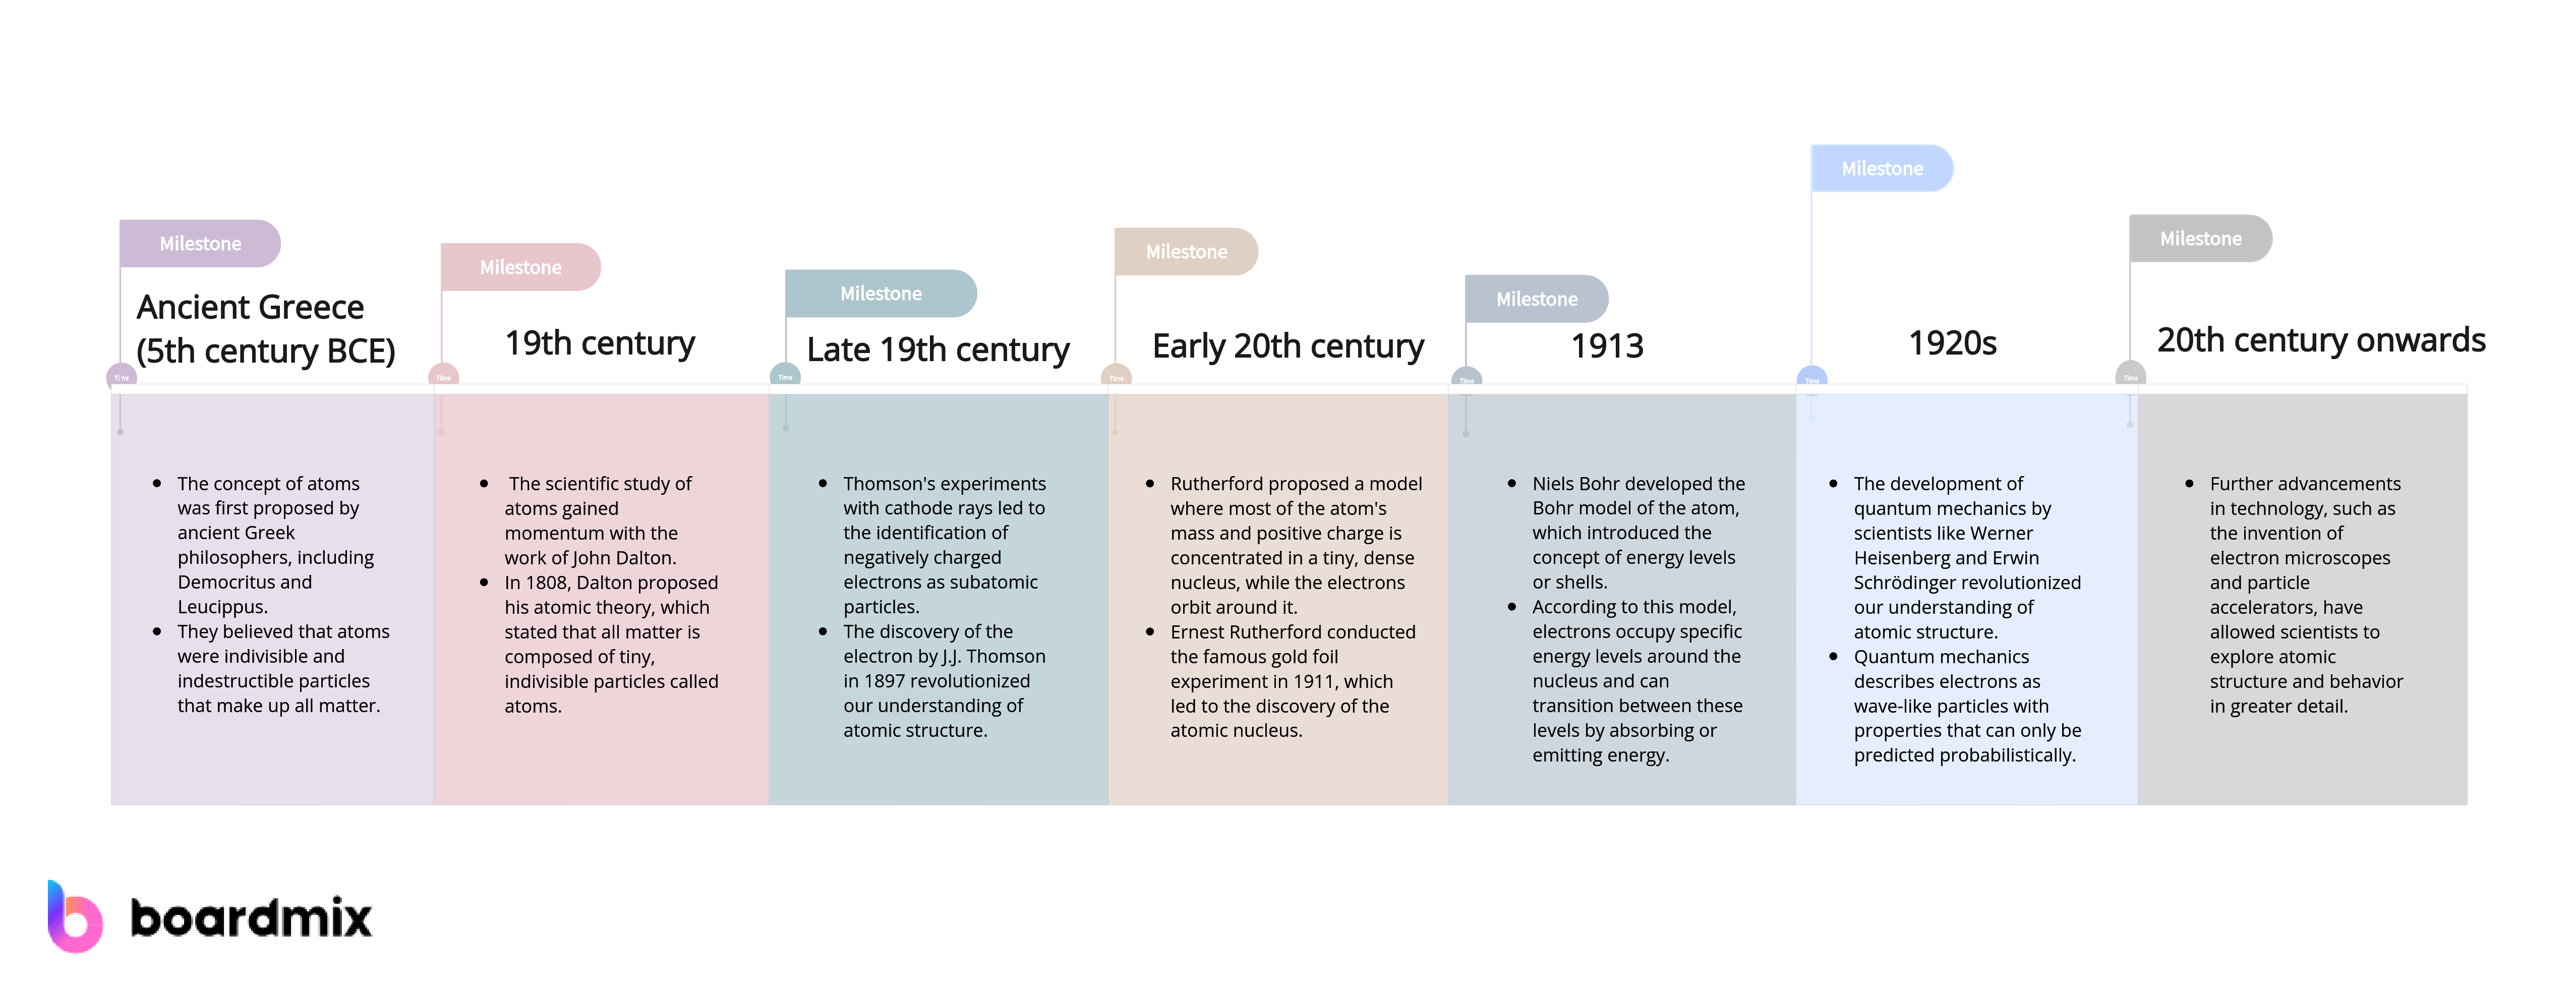 Atomic Theory Timeline Project: Unraveling Scientific Evolution